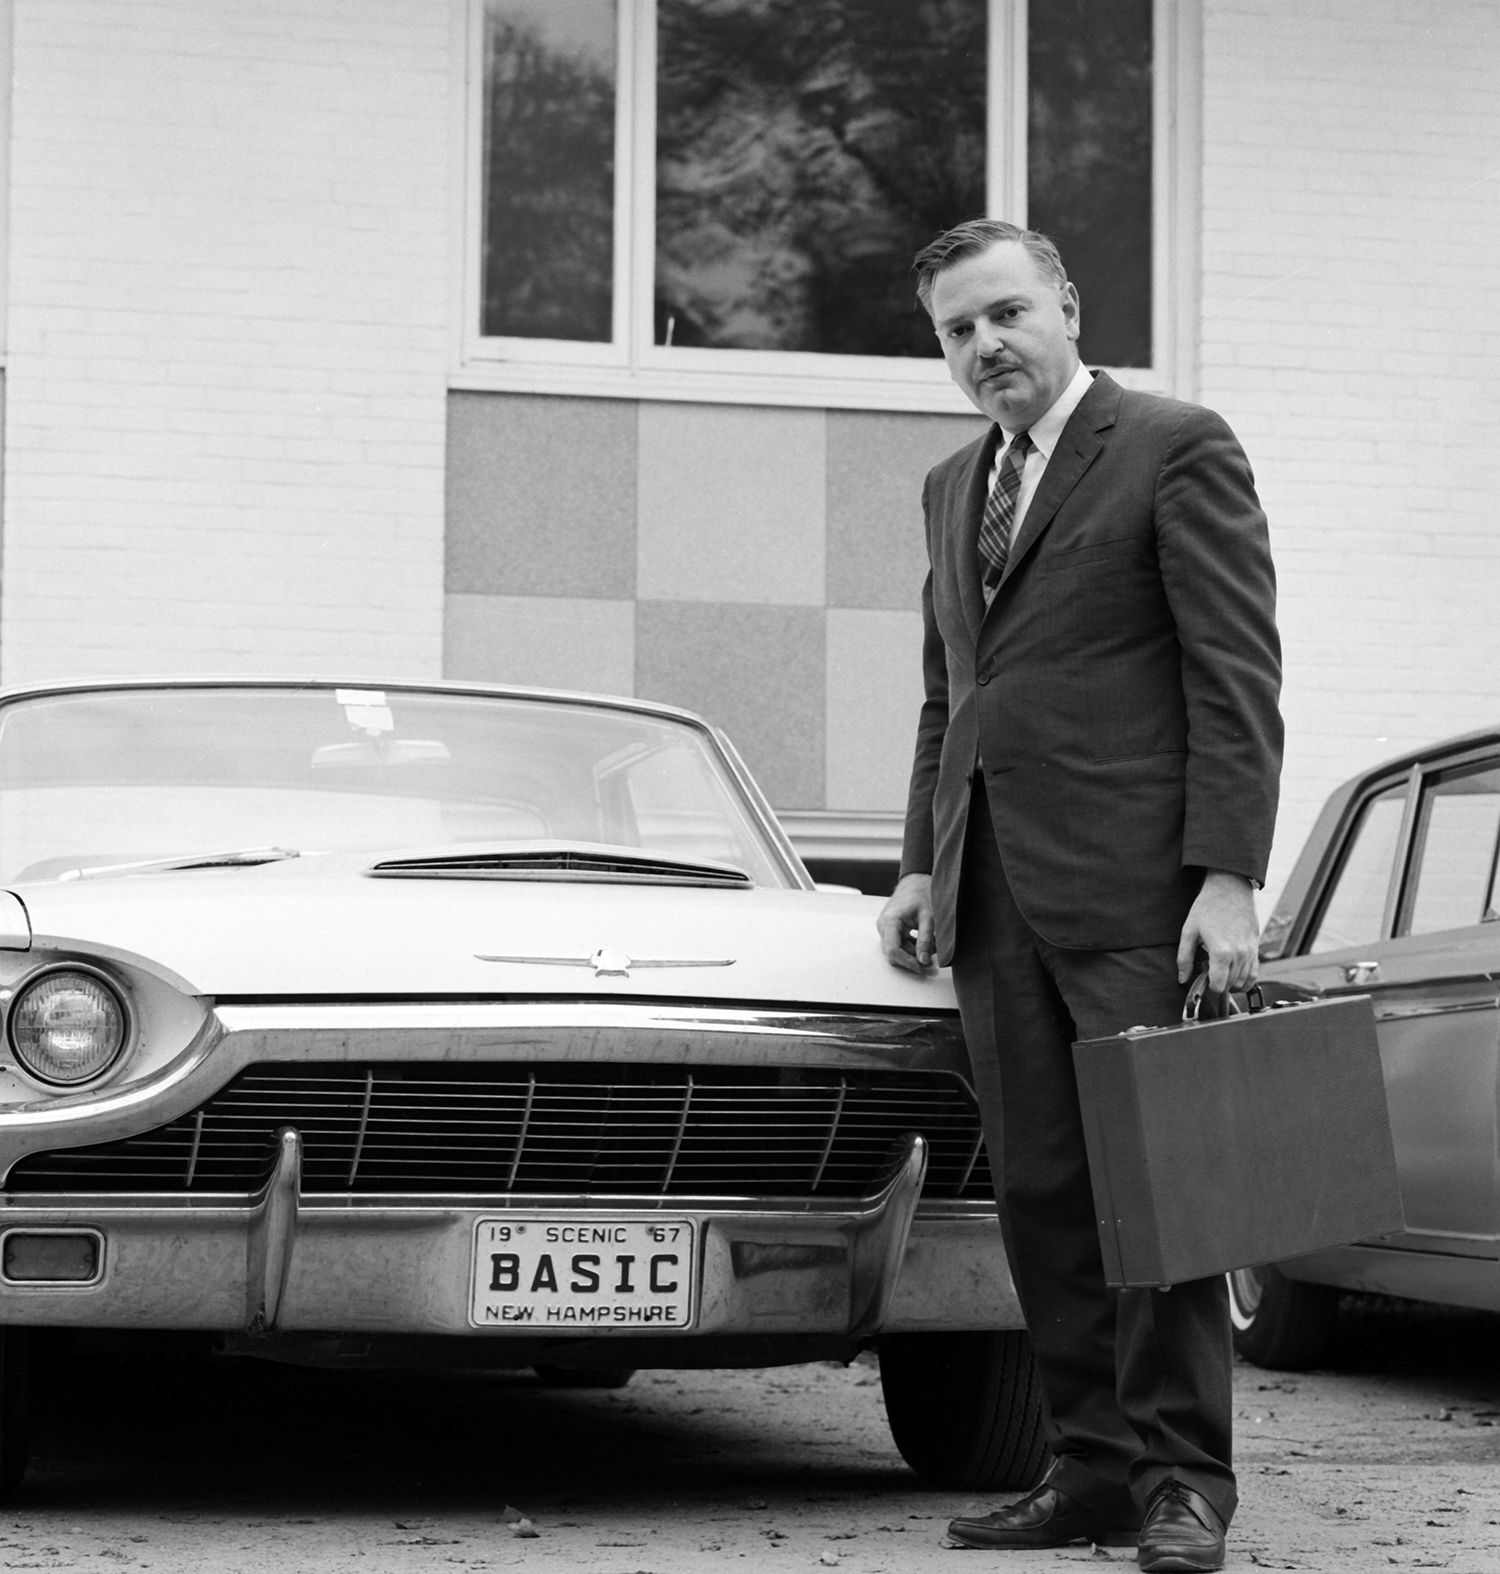 John Kemeny shows off his vanity license plate in 1967 (Adrian N. Bouchard / Dartmouth College)